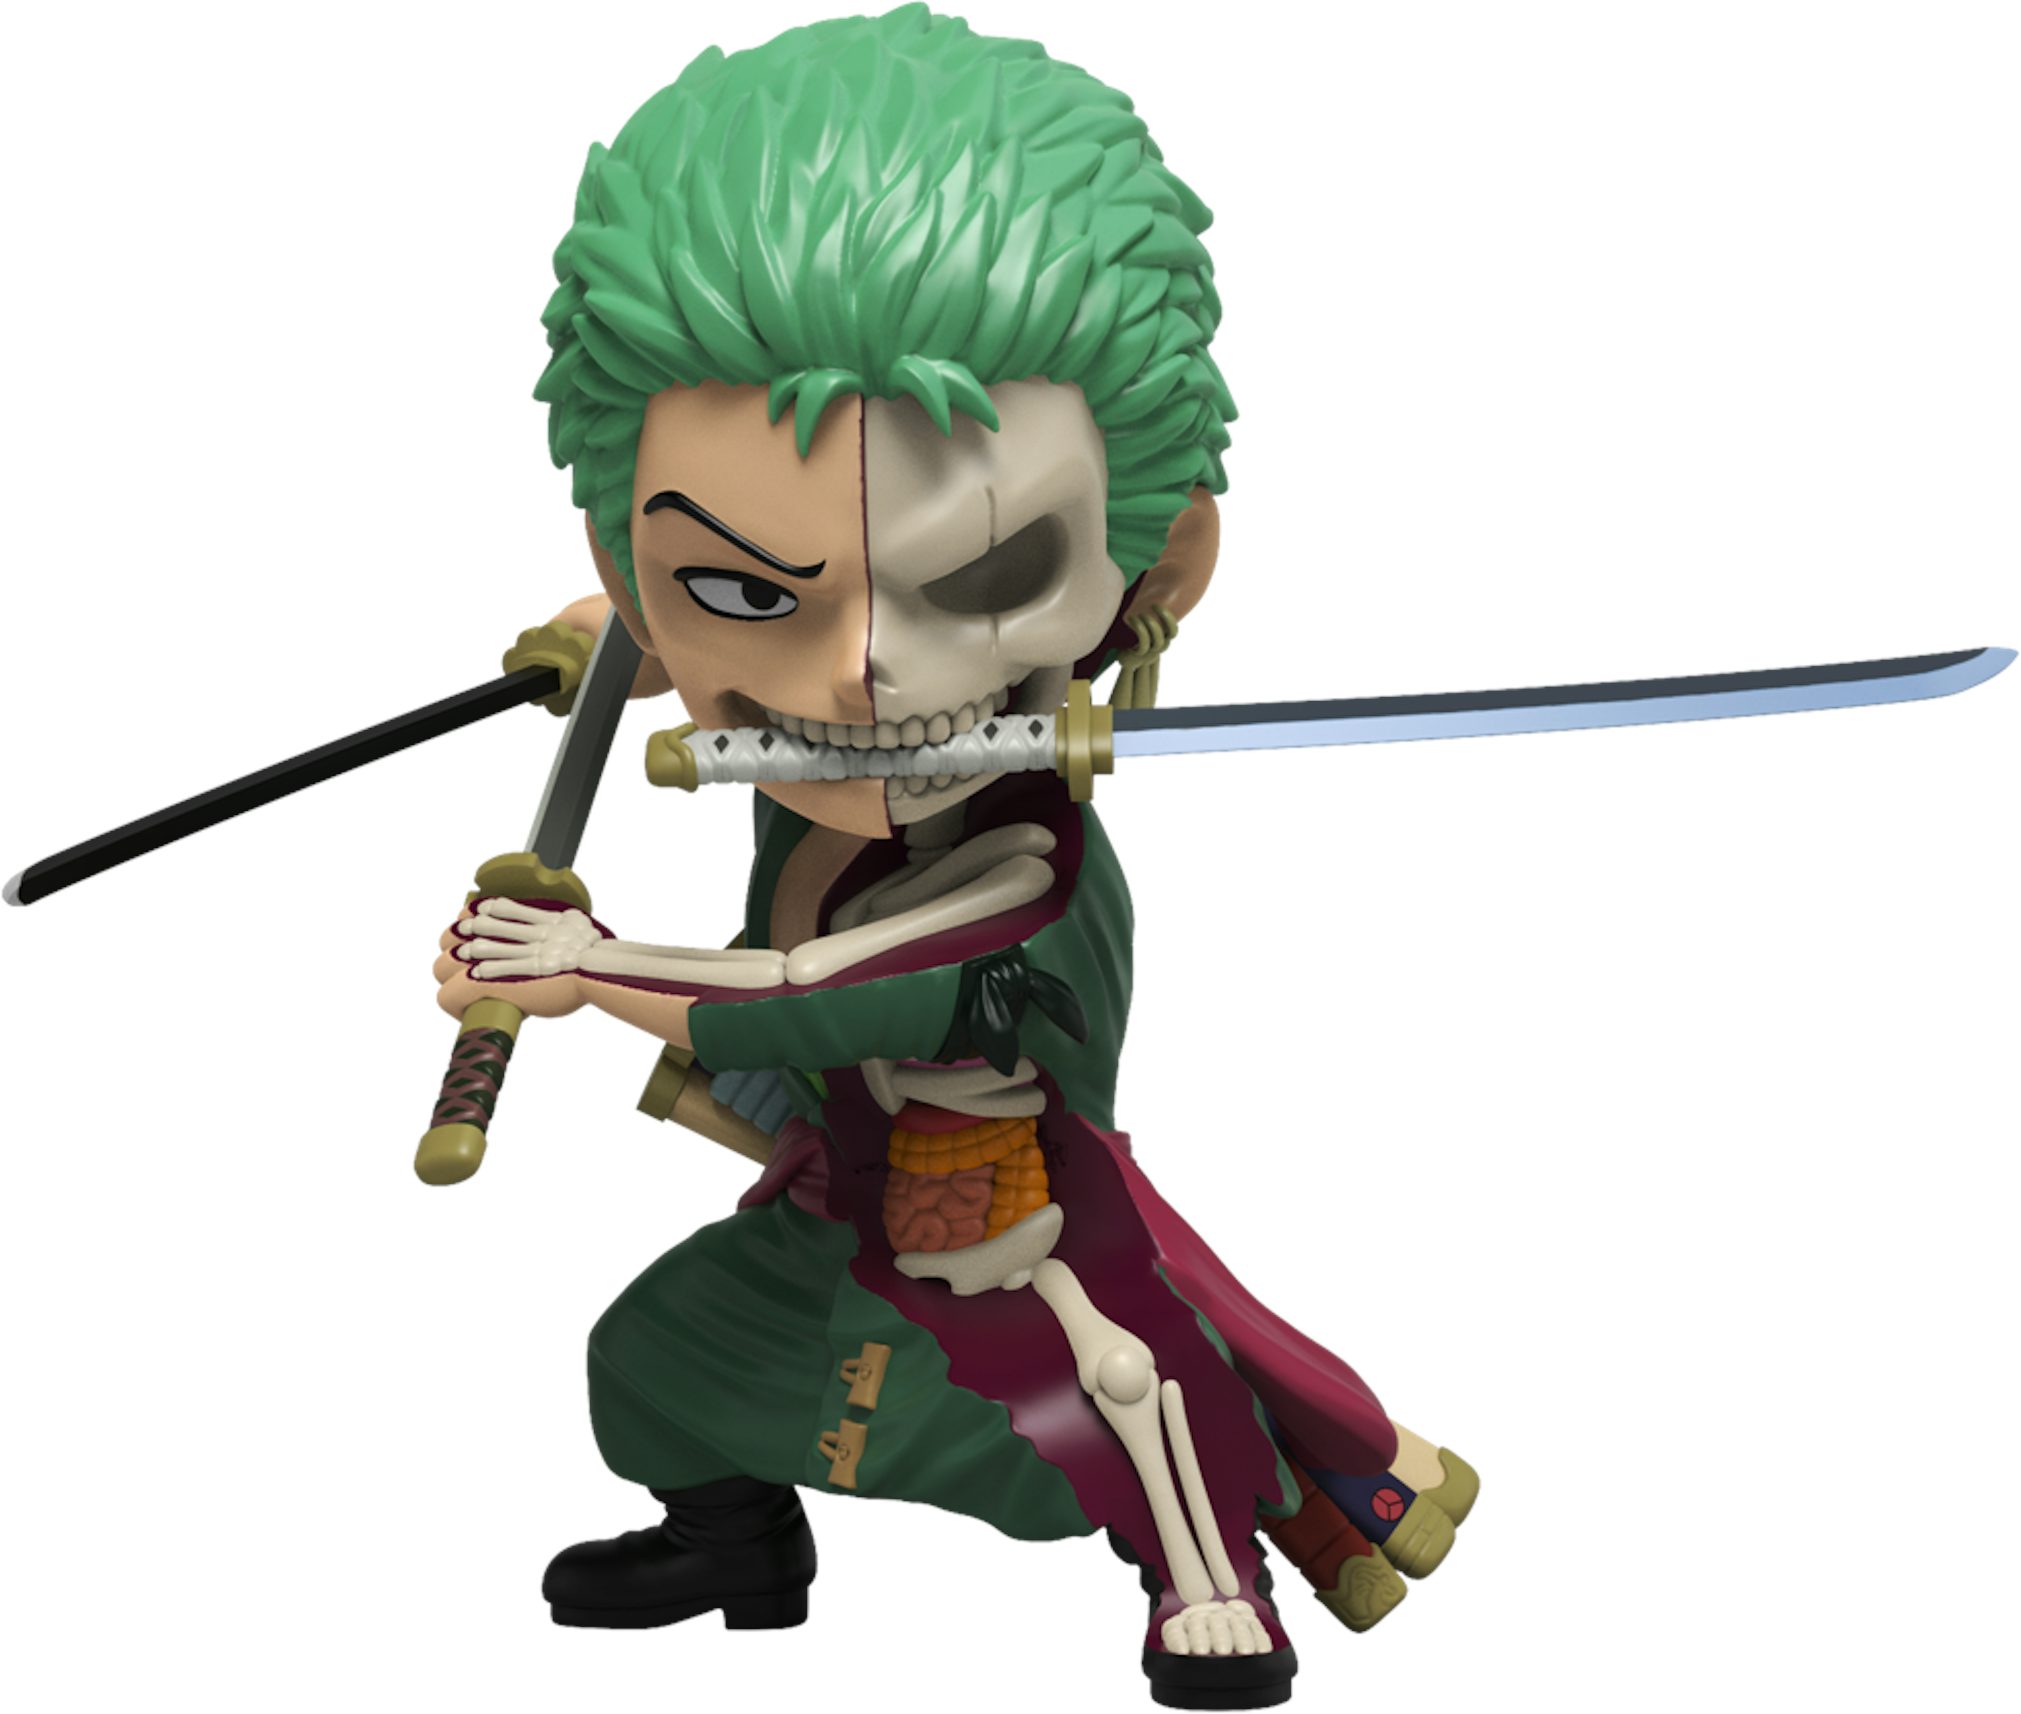 https://images.stockx.com/images/Jason-Freeny-Hidden-Dissectables-One-Piece-Zoro-Figure.png?fit=fill&bg=FFFFFF&w=1200&h=857&fm=jpg&auto=compress&dpr=2&trim=color&updated_at=1620145797&q=60